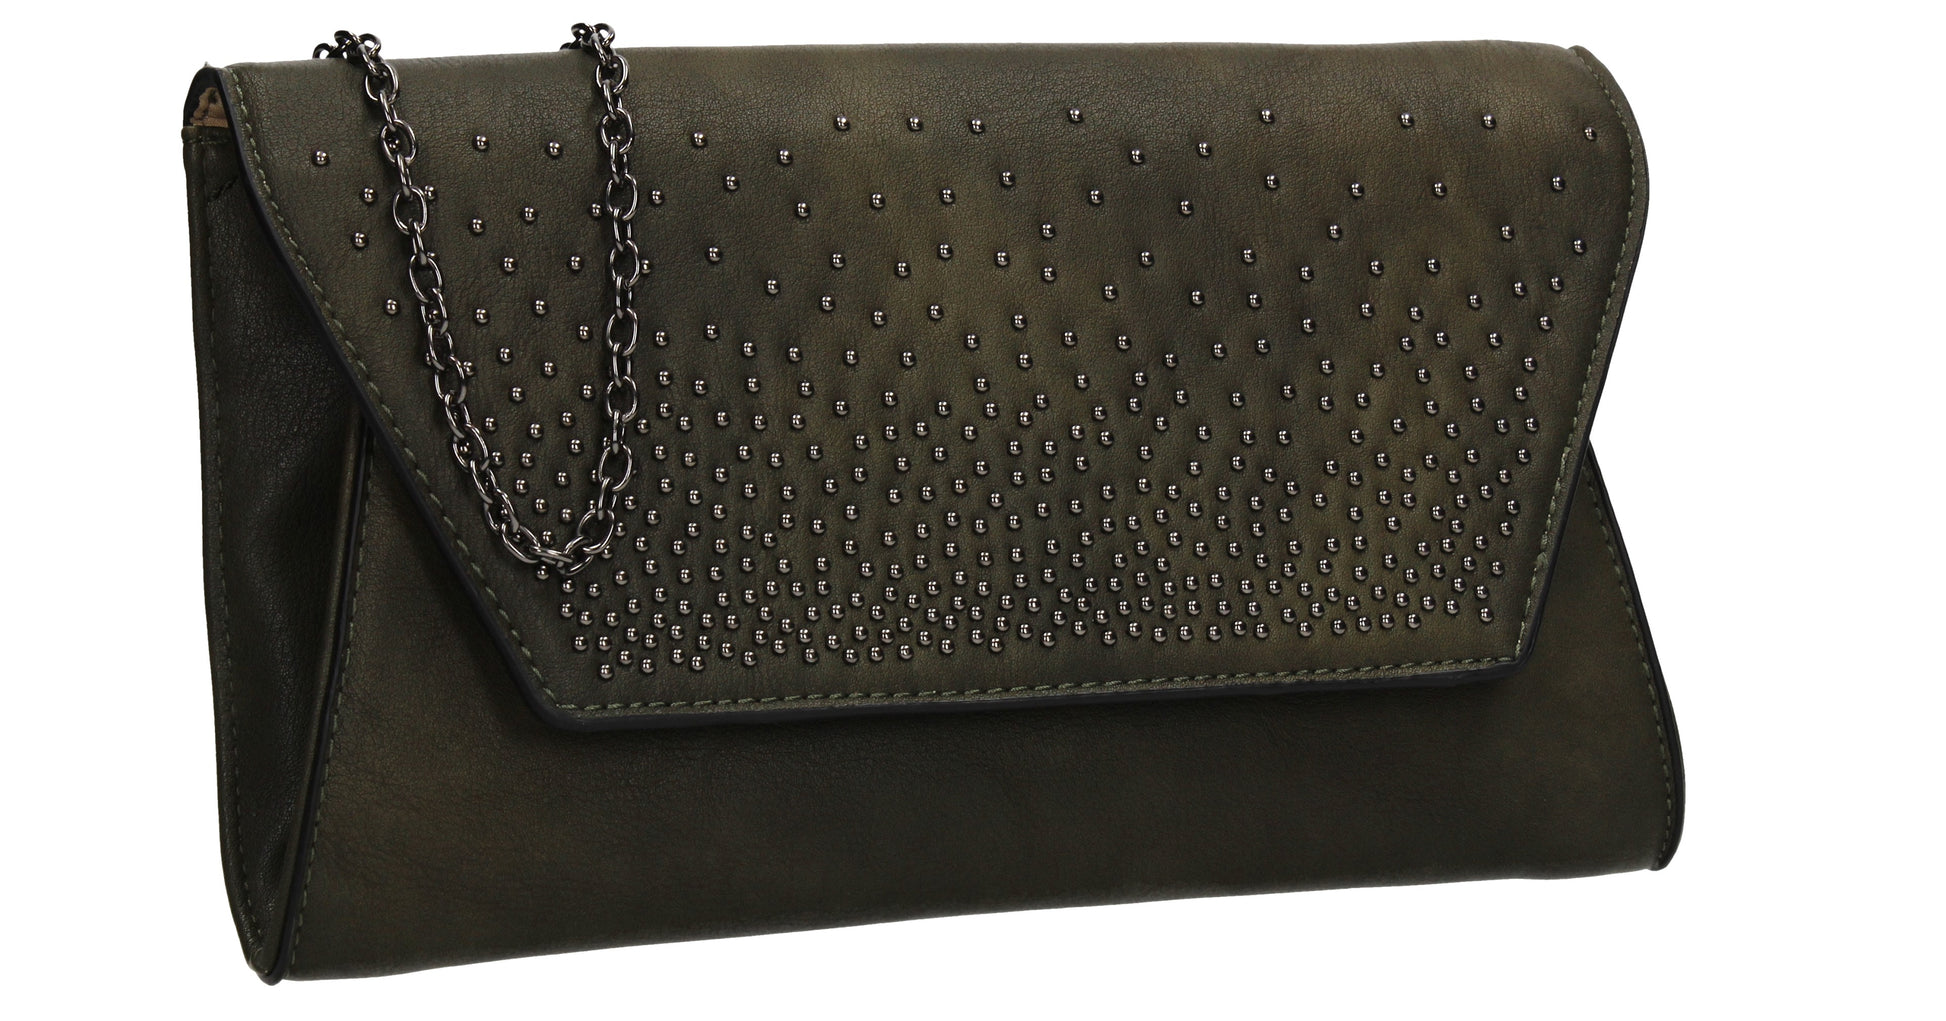 SWANKYSWANS Paige Diamante Stud Clutch Bag Olive Cute Cheap Clutch Bag For Weddings School and Work